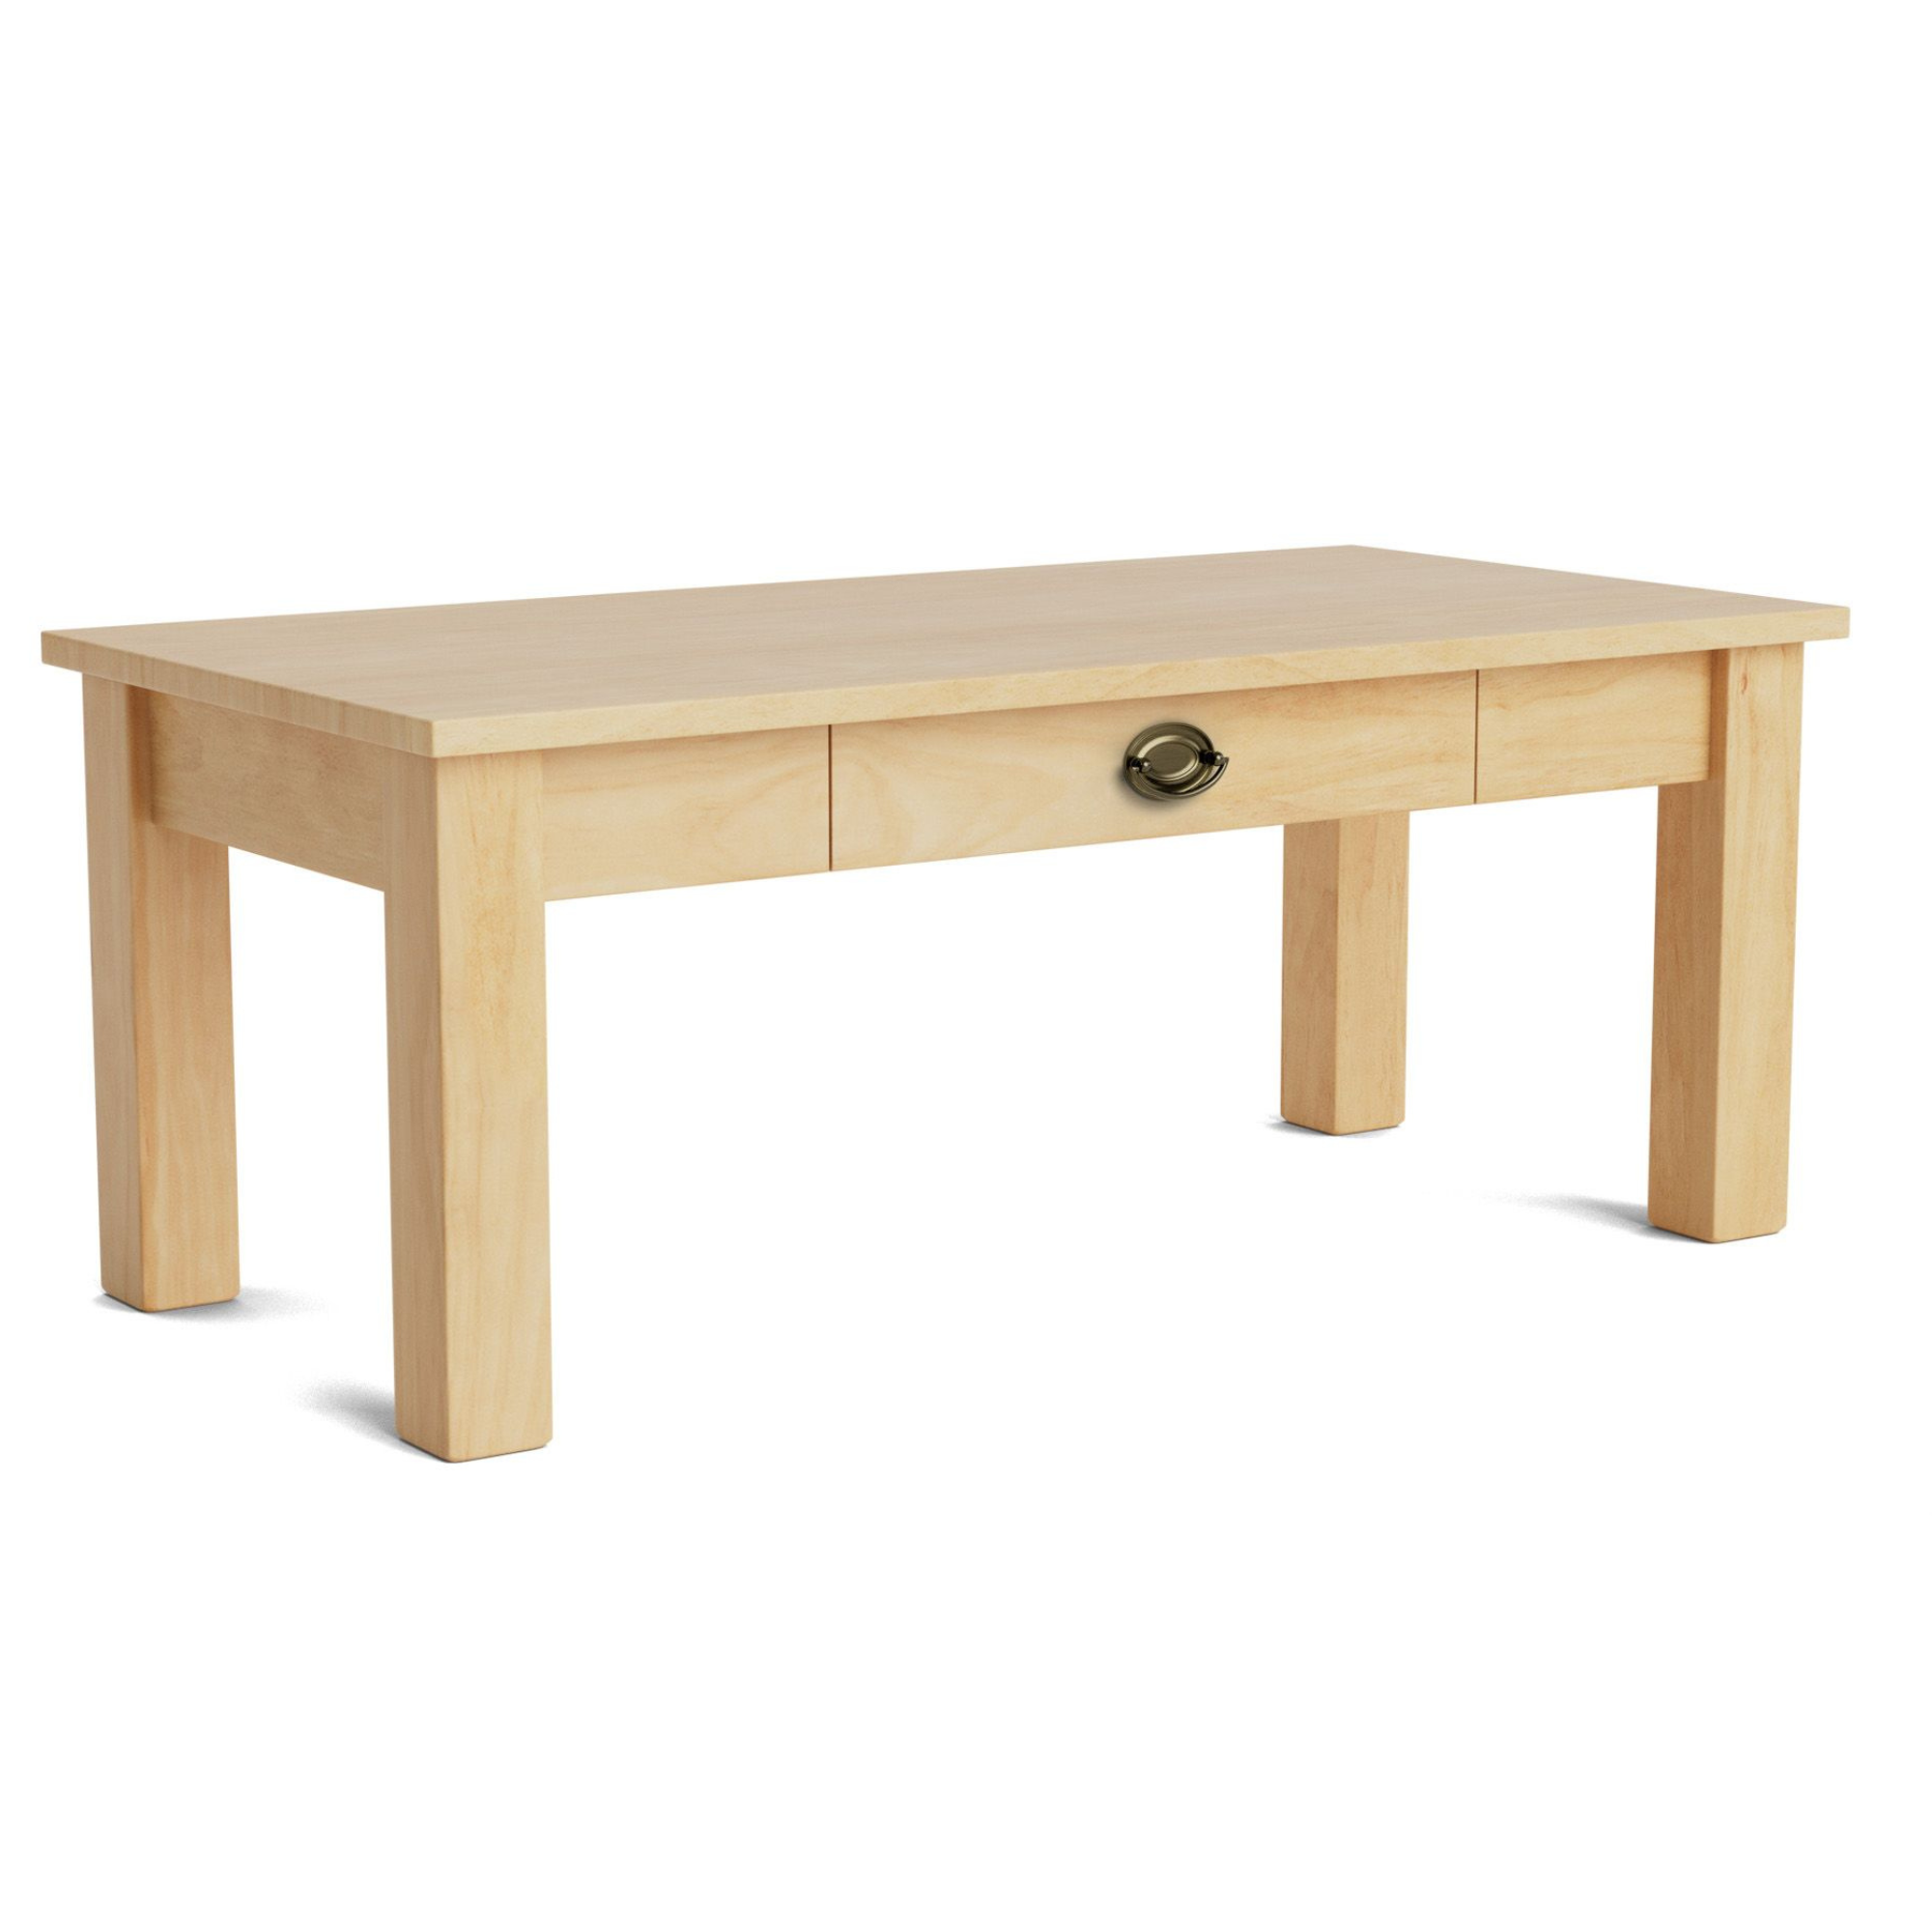 CHARLTON COFFEE TABLE WITH DRAWER | NZ MADE